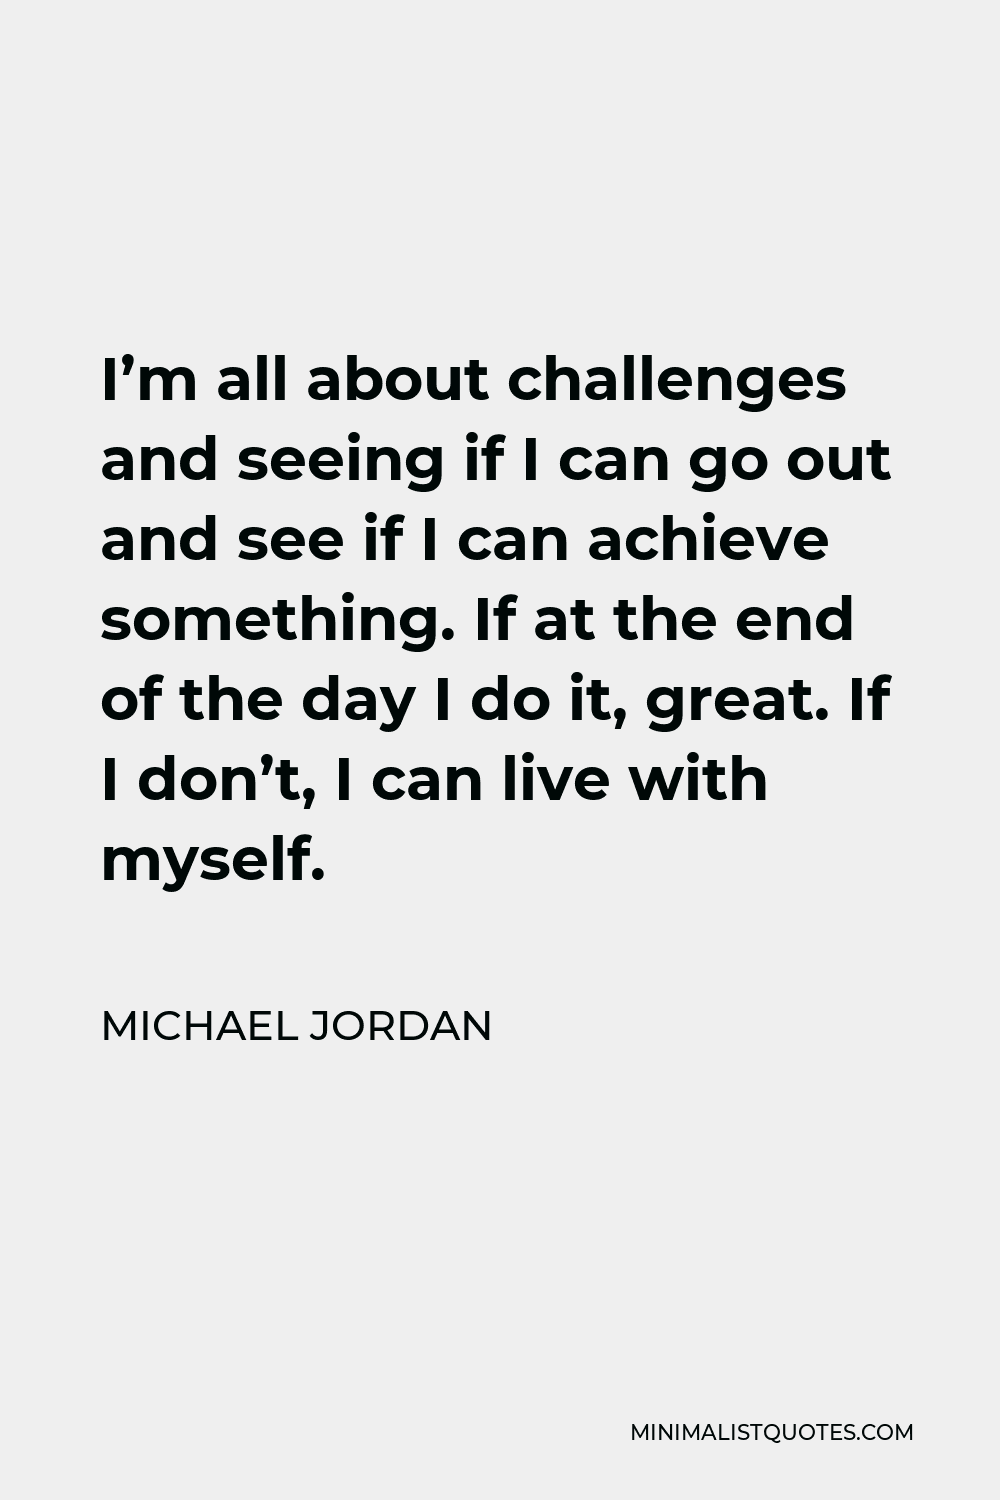 Michael Jordan Quote - I’m all about challenges and seeing if I can go out and see if I can achieve something. If at the end of the day I do it, great. If I don’t, I can live with myself.